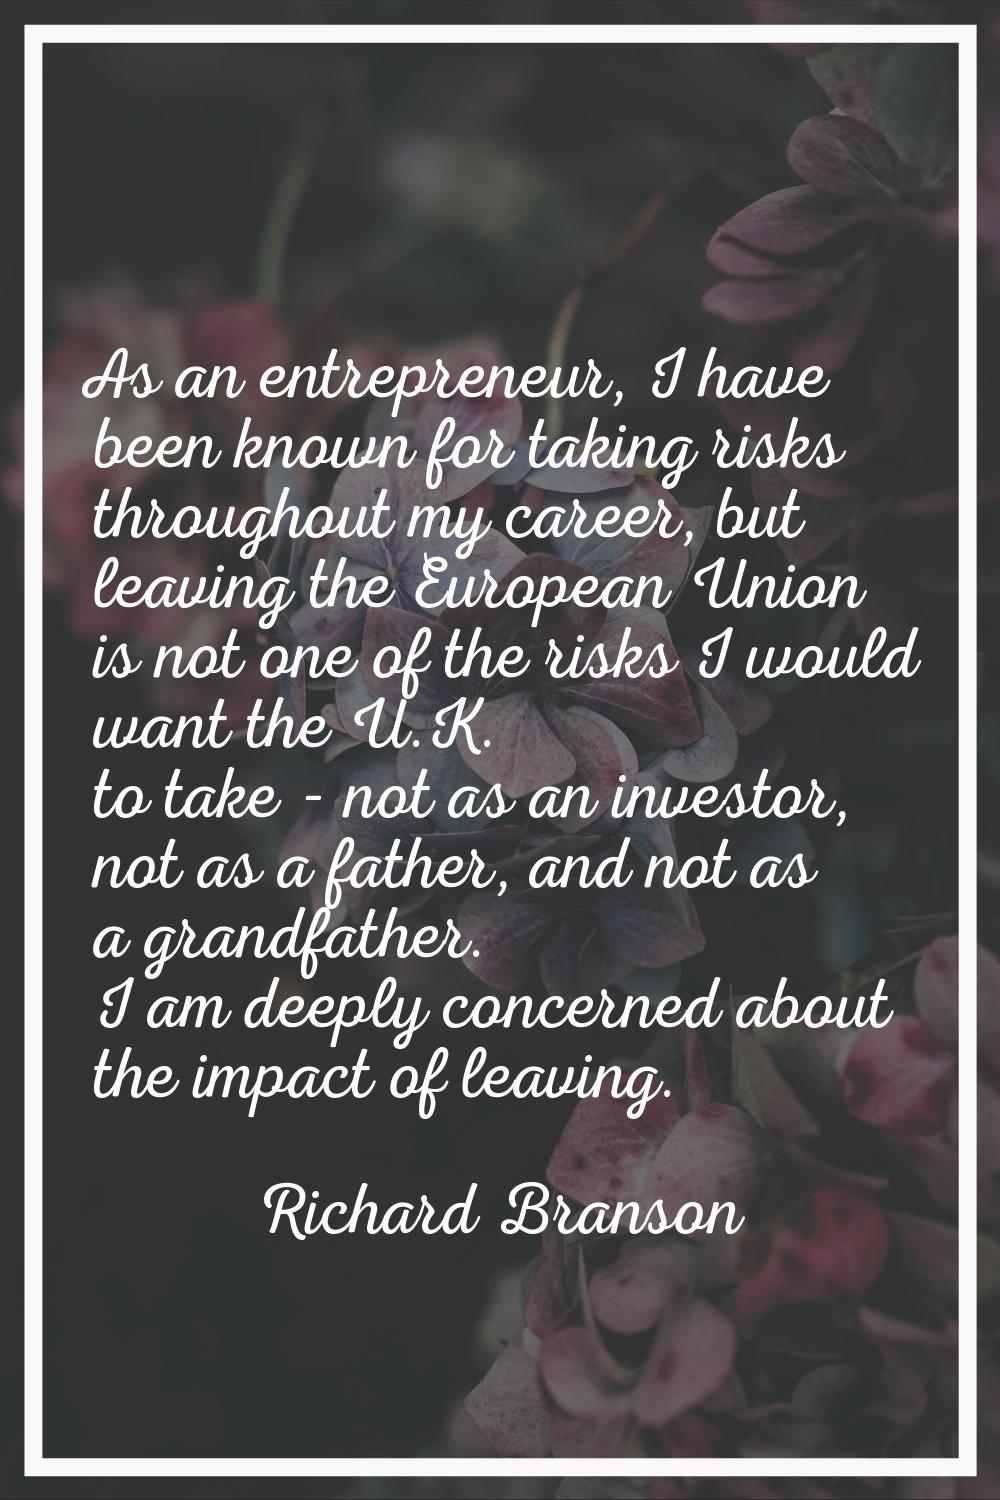 As an entrepreneur, I have been known for taking risks throughout my career, but leaving the Europe